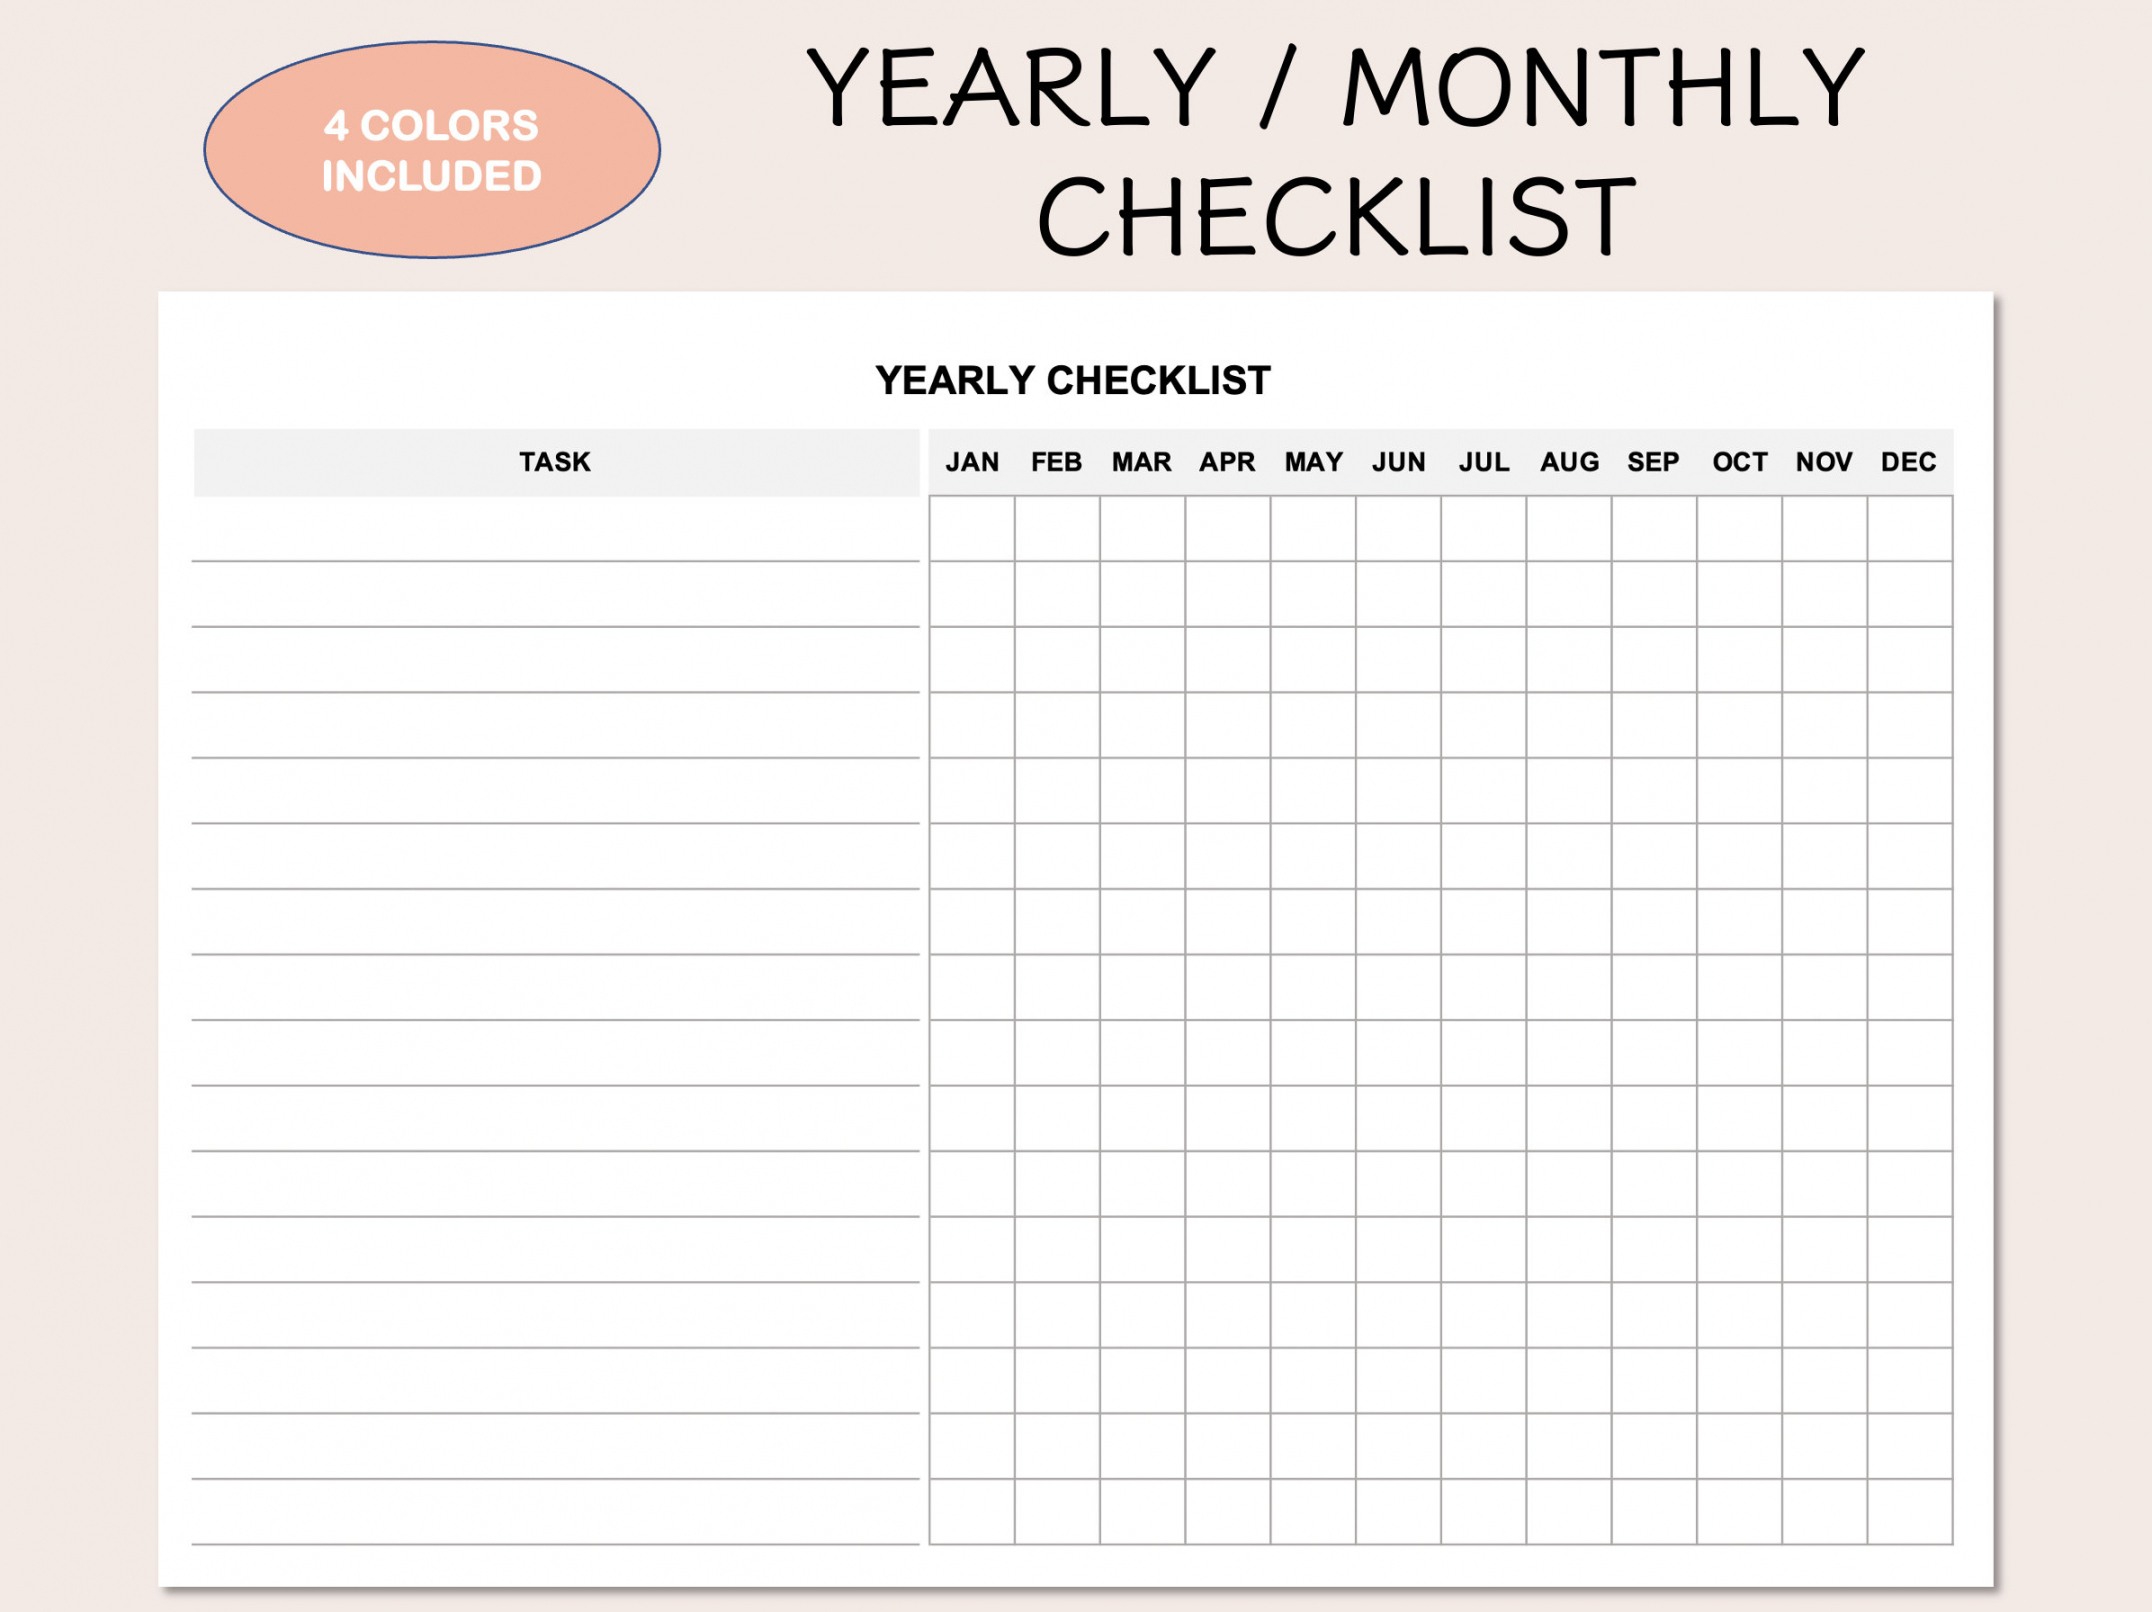 Printable Yearly Checklist Monthly Checklist to Do List - Etsy - FREE Printables - Monthly Checklist